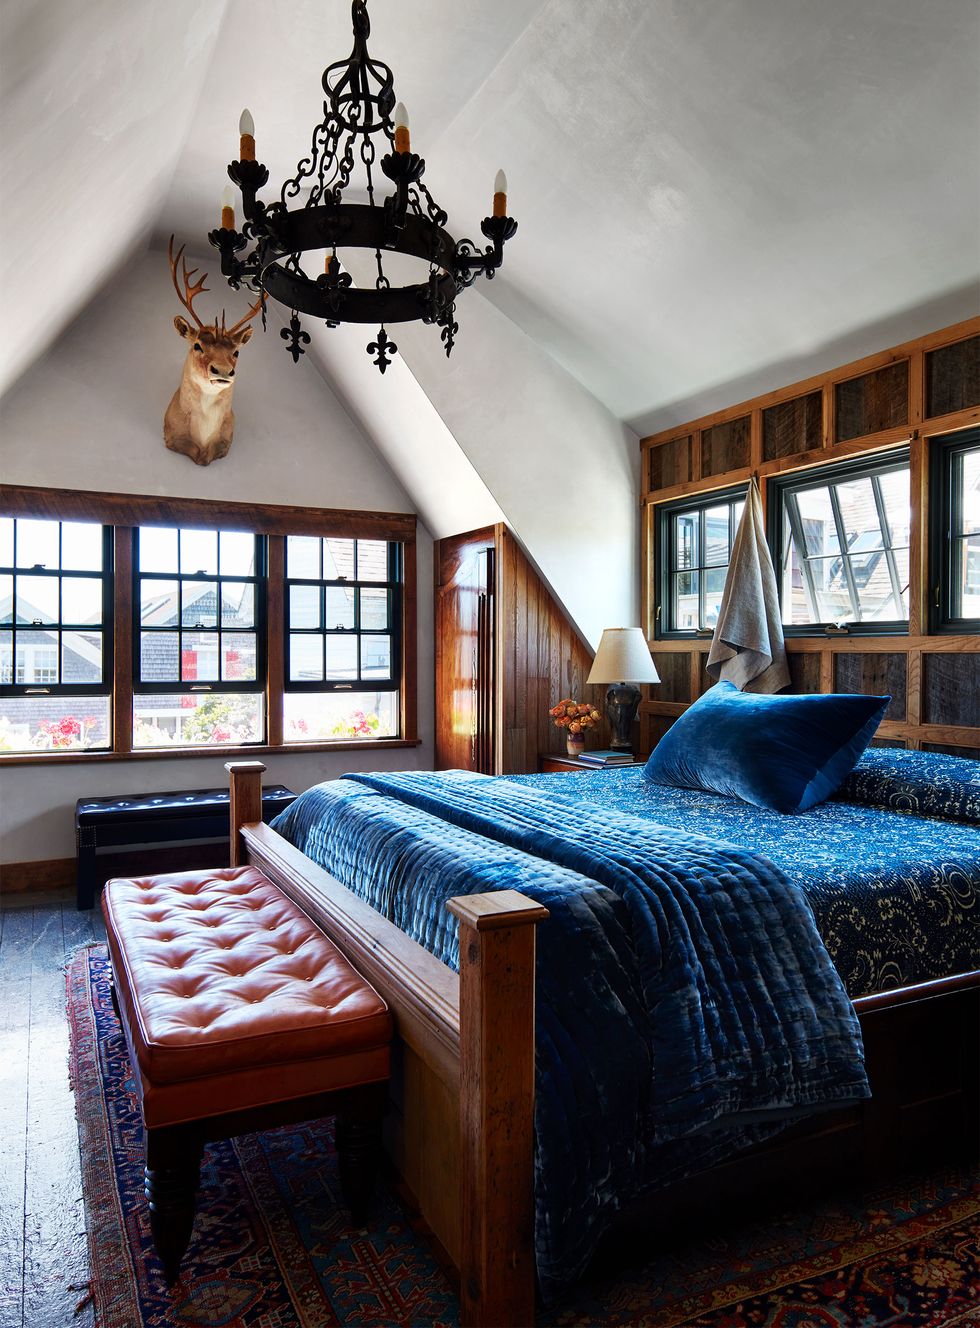 a primary bedroom has deep blue bedding, vented windows above bed, a tufted leather bench at foot of bed and another by a second set of windows, wrought iron chandelier, and a taxidermied deer's head on wall